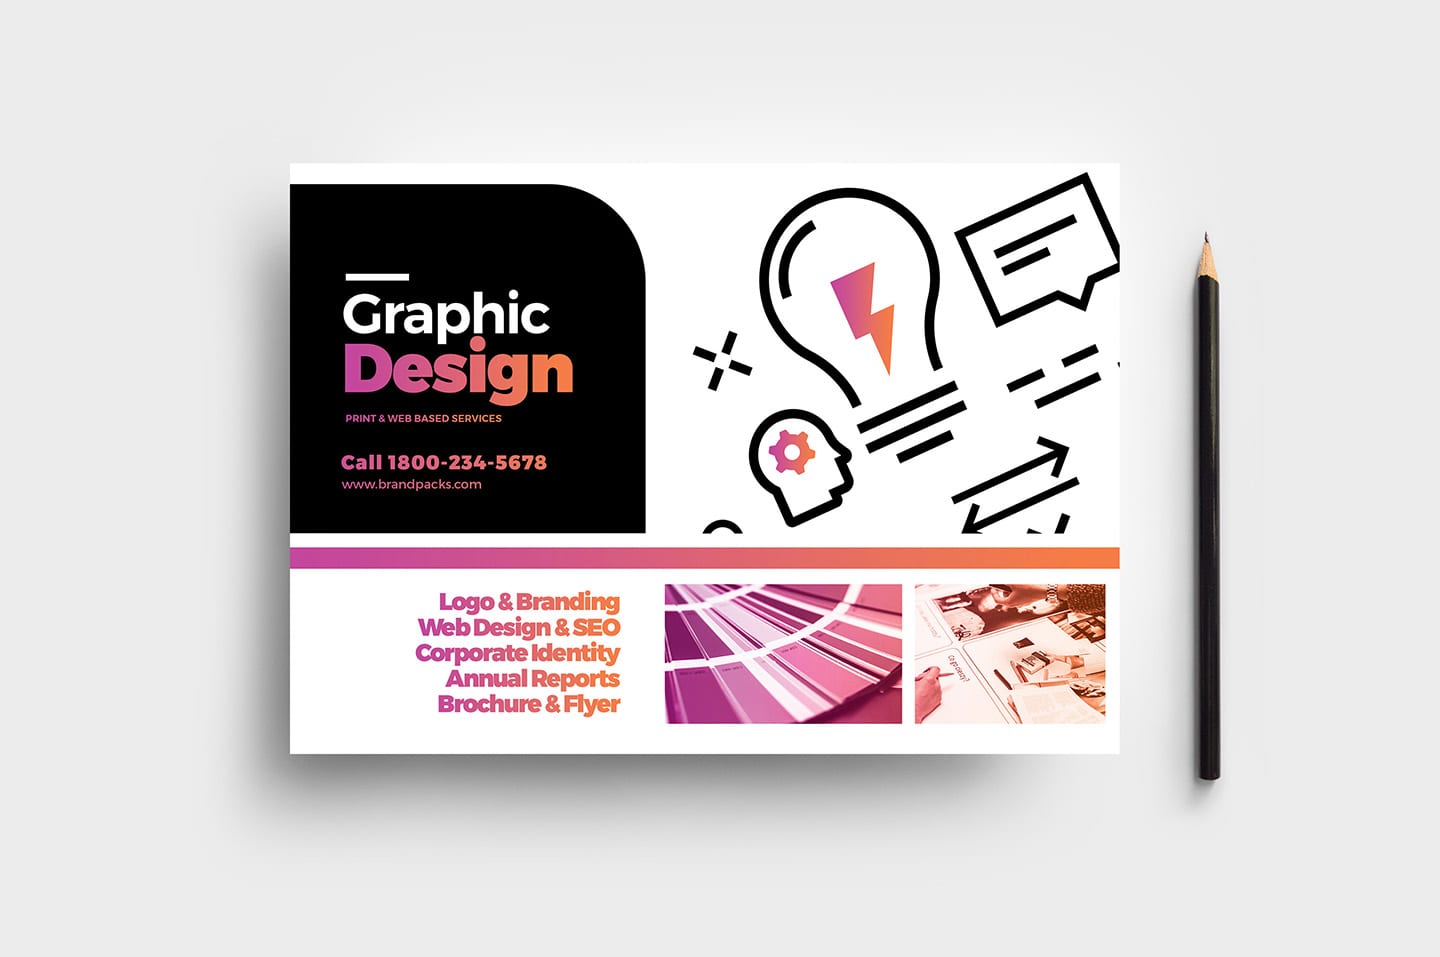 Graphic Design Agency Flyer Template for Photoshop & Illustrator